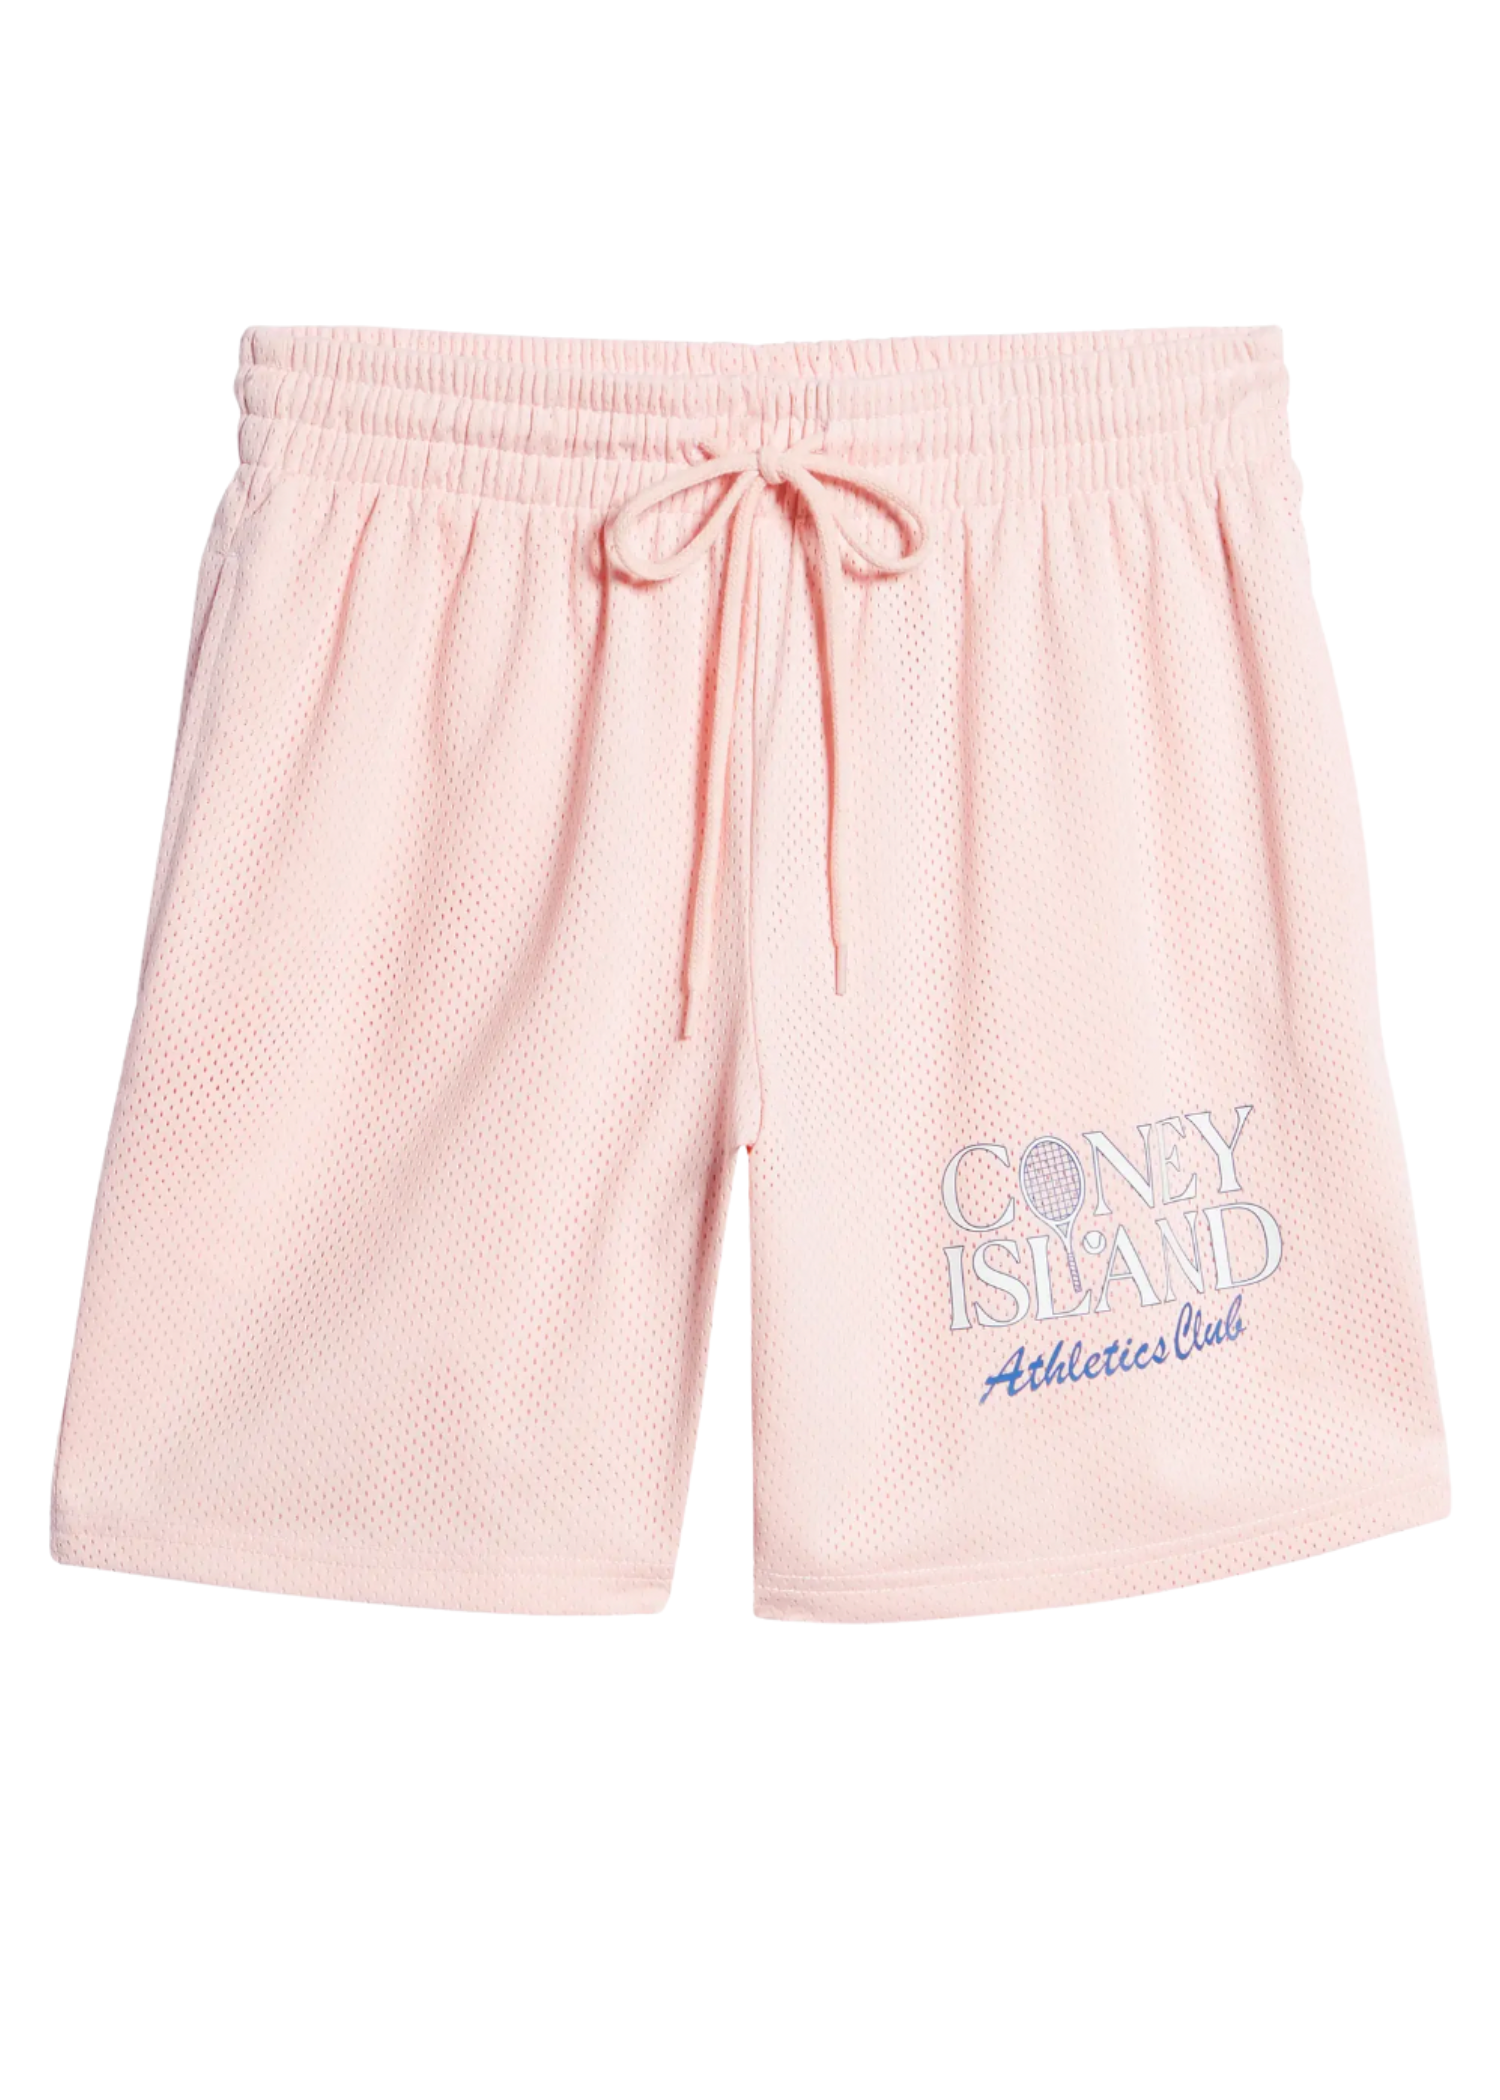 Trust The Mystery Mesh Shorts | Coney Island Picnic | Brown | X-Large